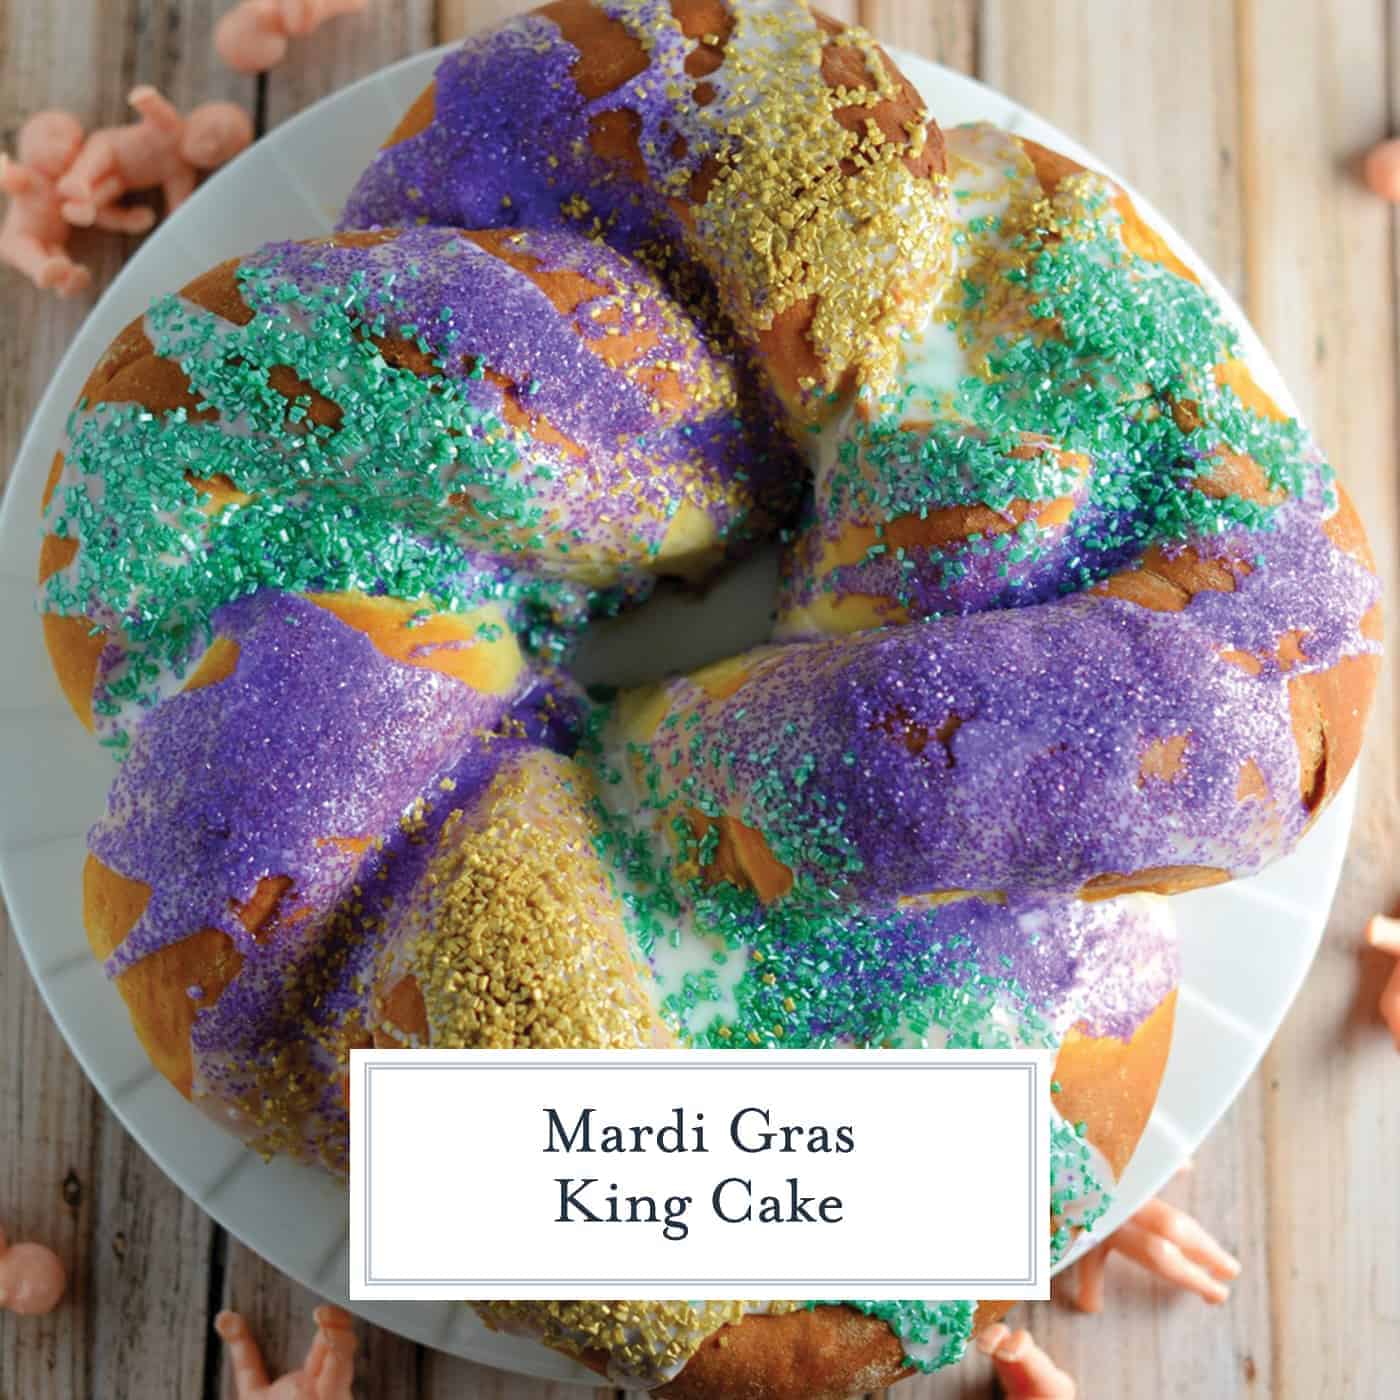 Make your own braided King Cake for Mardi Gras, complete with brown sugar pecan filling, icing, festive colors and one plastic baby. #mardigras #kingcake #fattuesday www.savoryexperiments.com